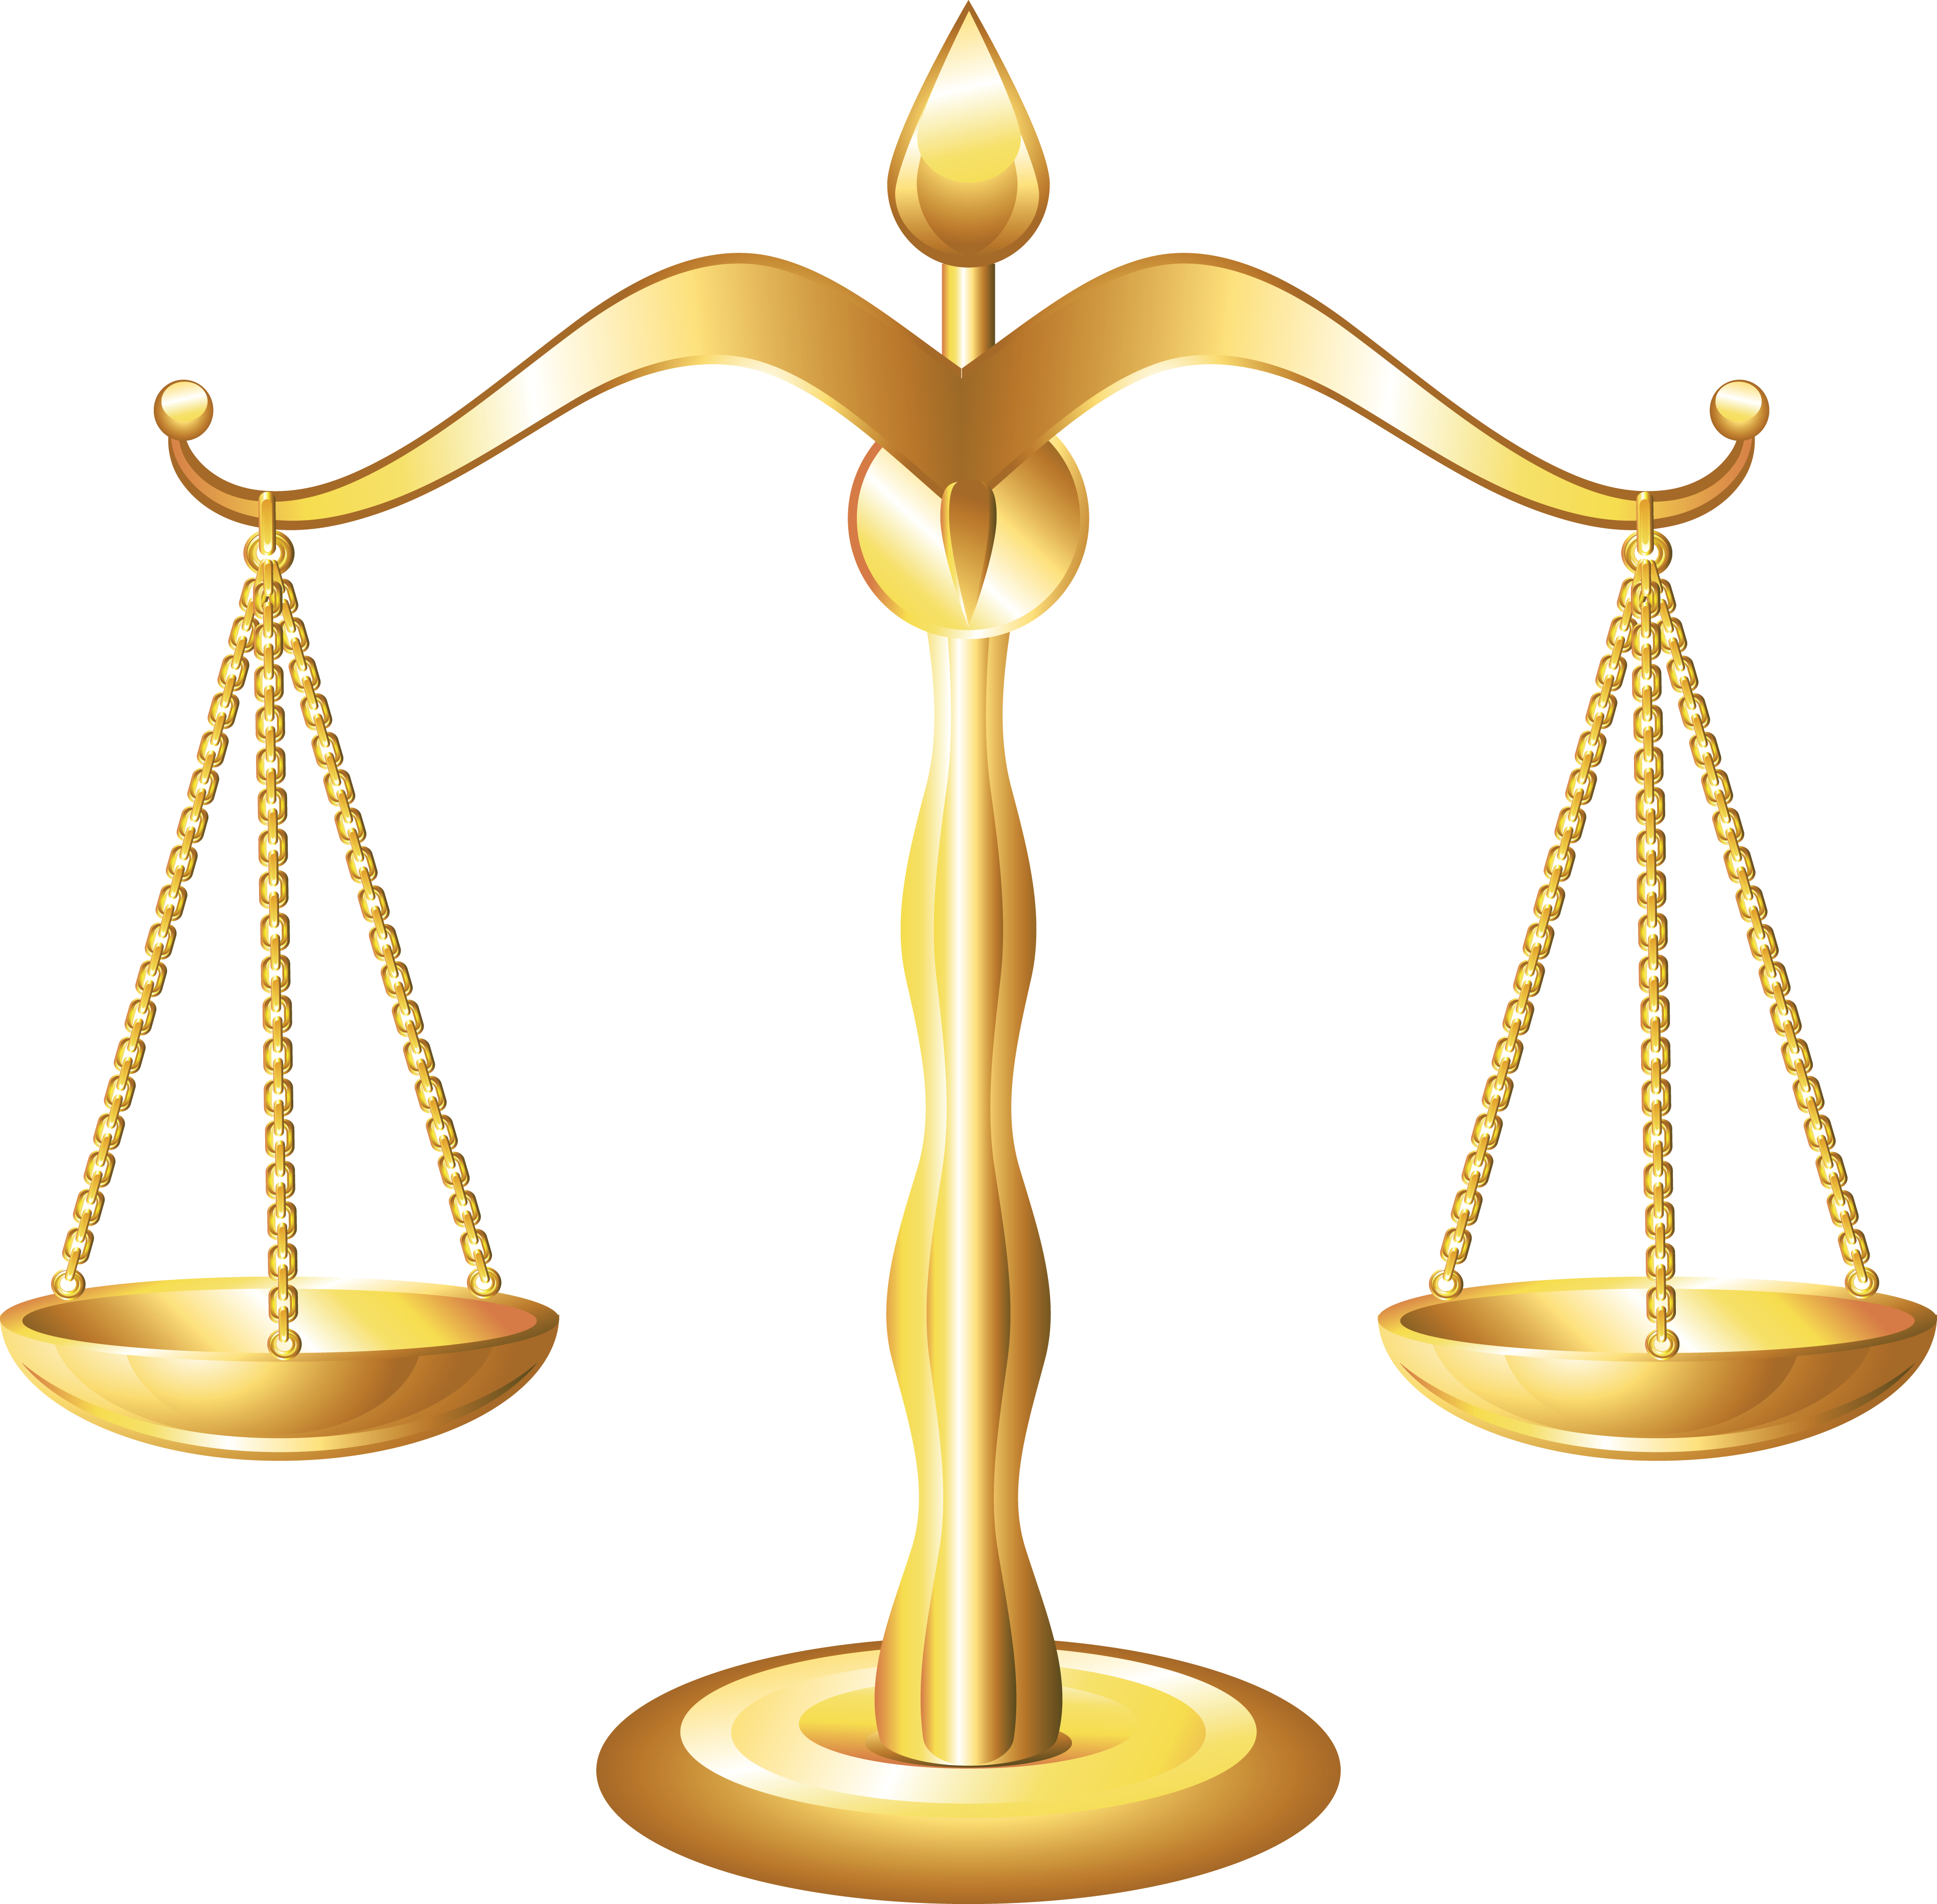 Measuring Scales Justice Royalty-free - Scales Of Justice Clipart, Find mor...